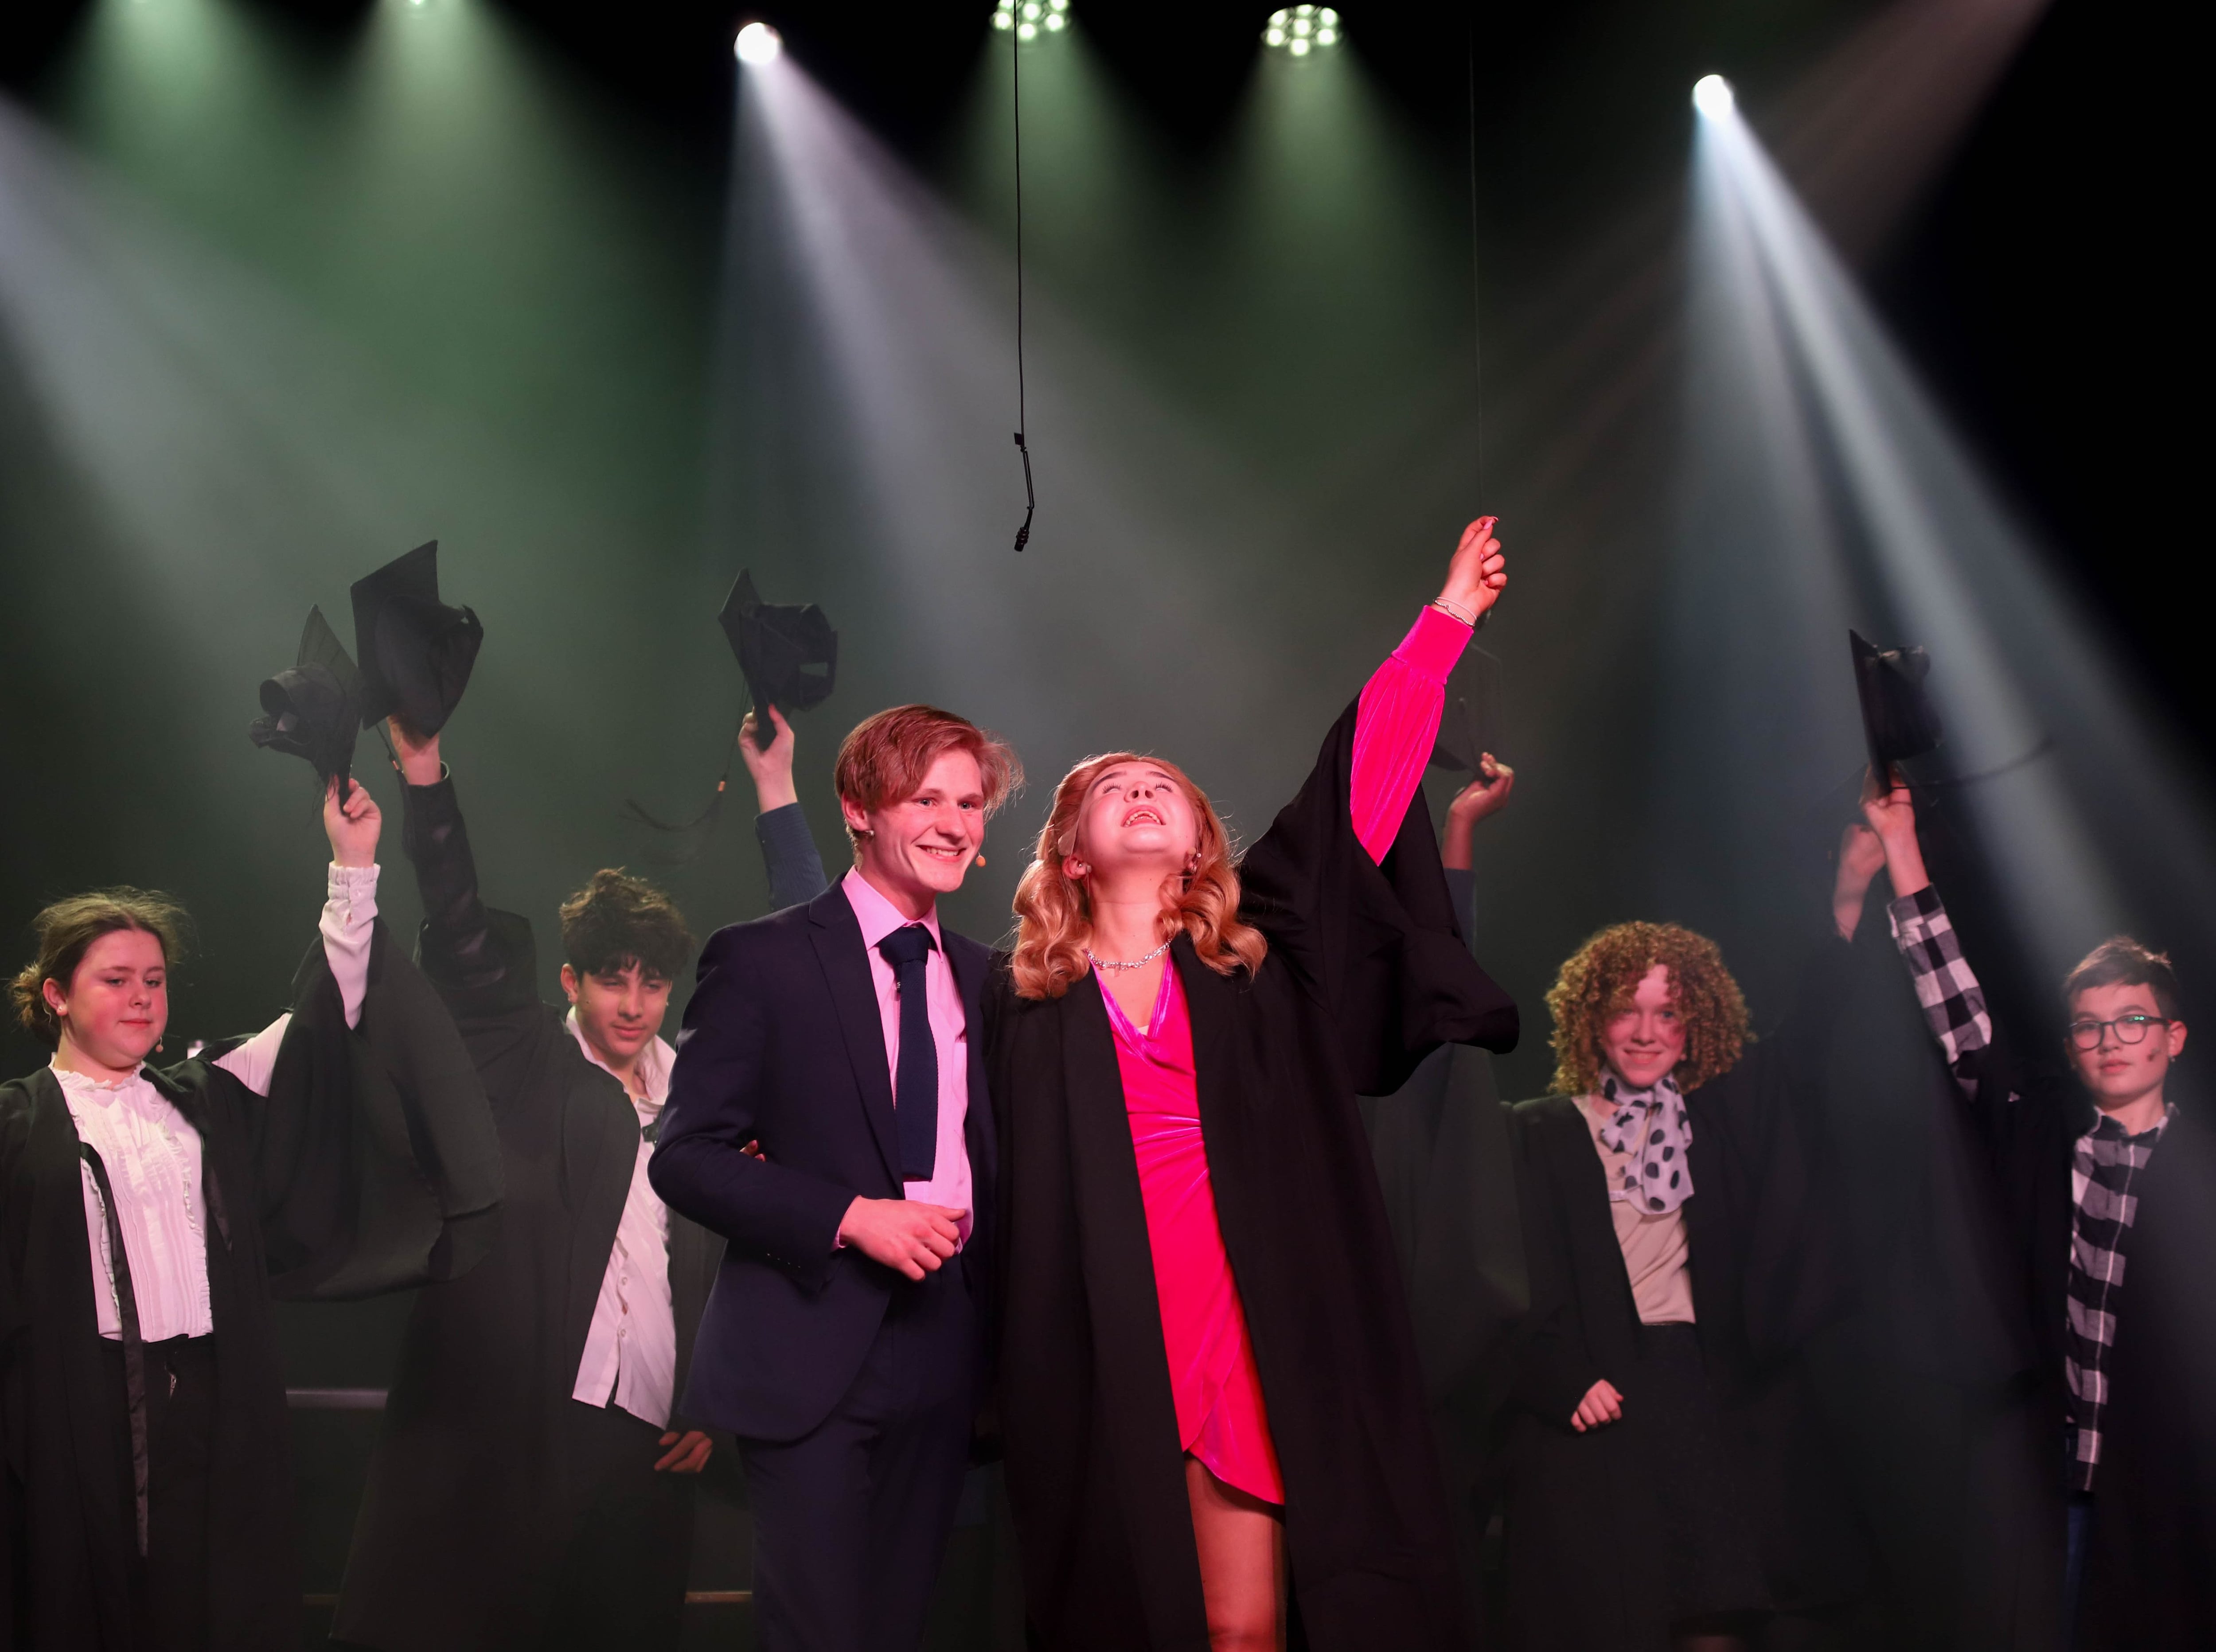 Dynamic Performing Arts Program at Stafford Grammar School Achieves National Recognition